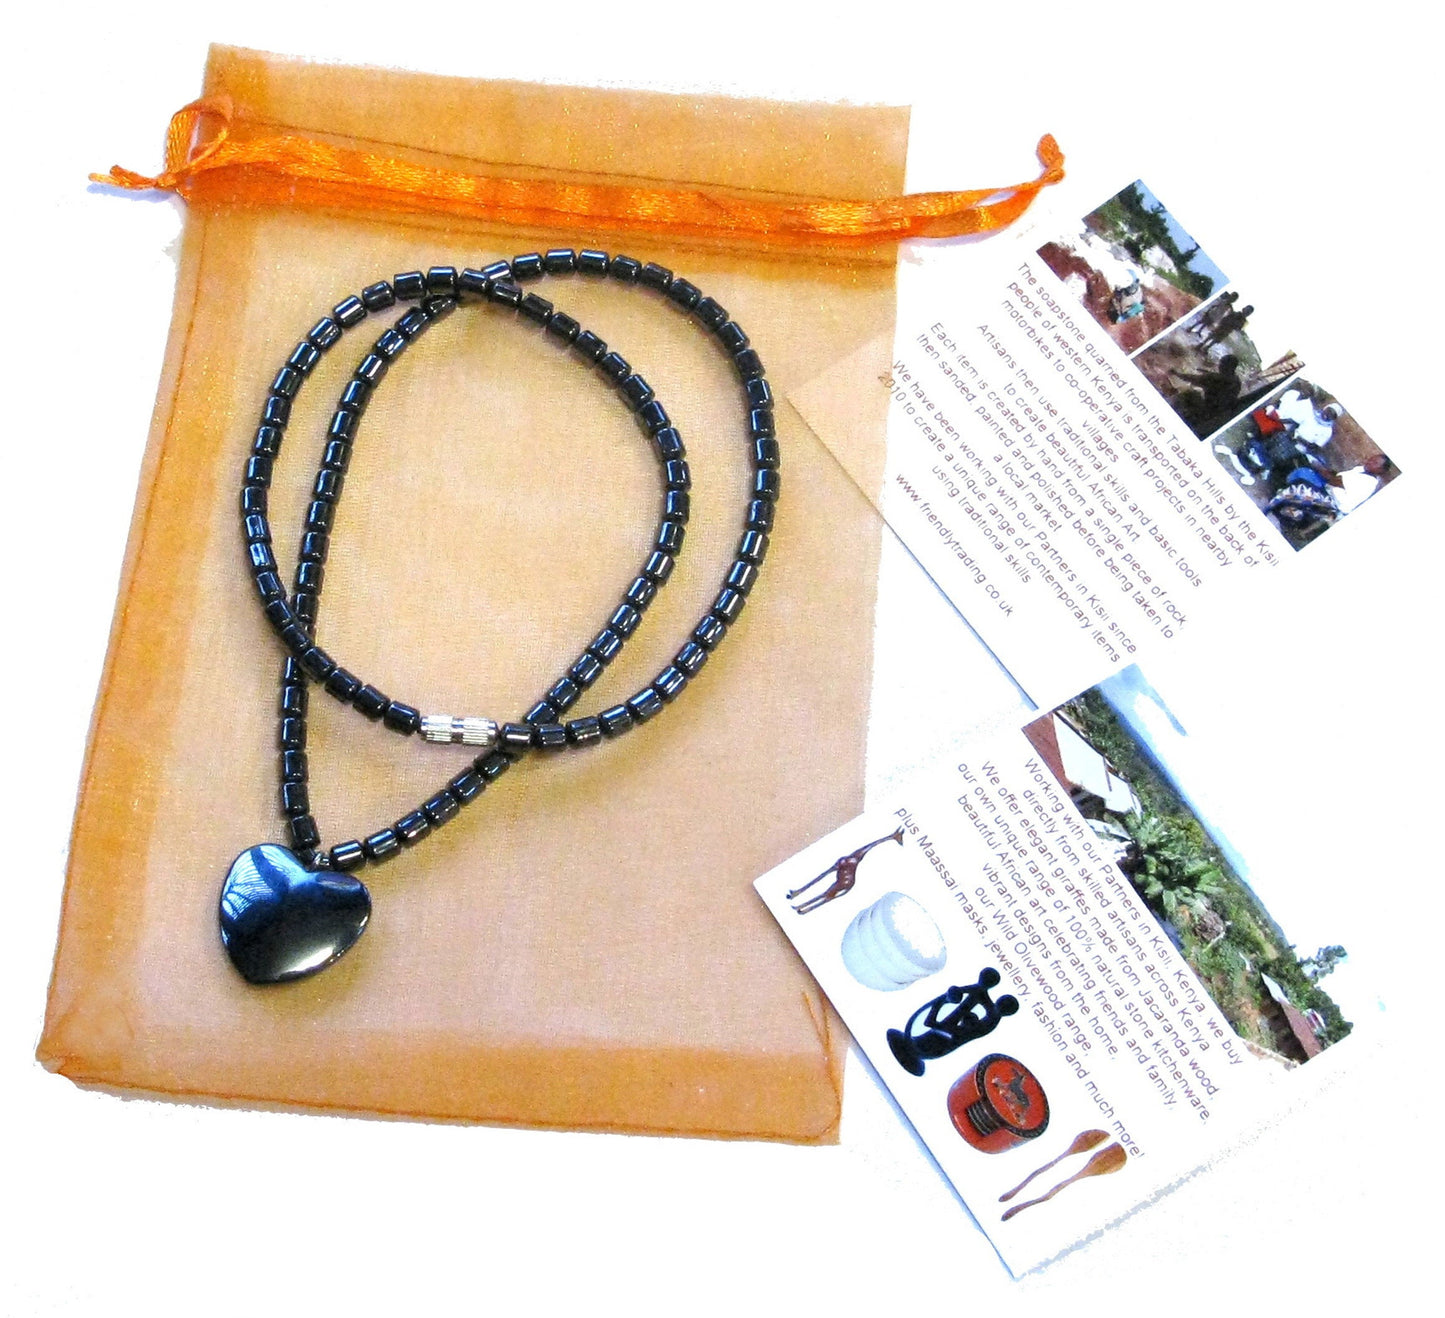 Hematite Healing Energy Anti-Stress Necklace 18" / 45 cm Flame Red Beaded Handmade + Presentation Pouch & Storycard